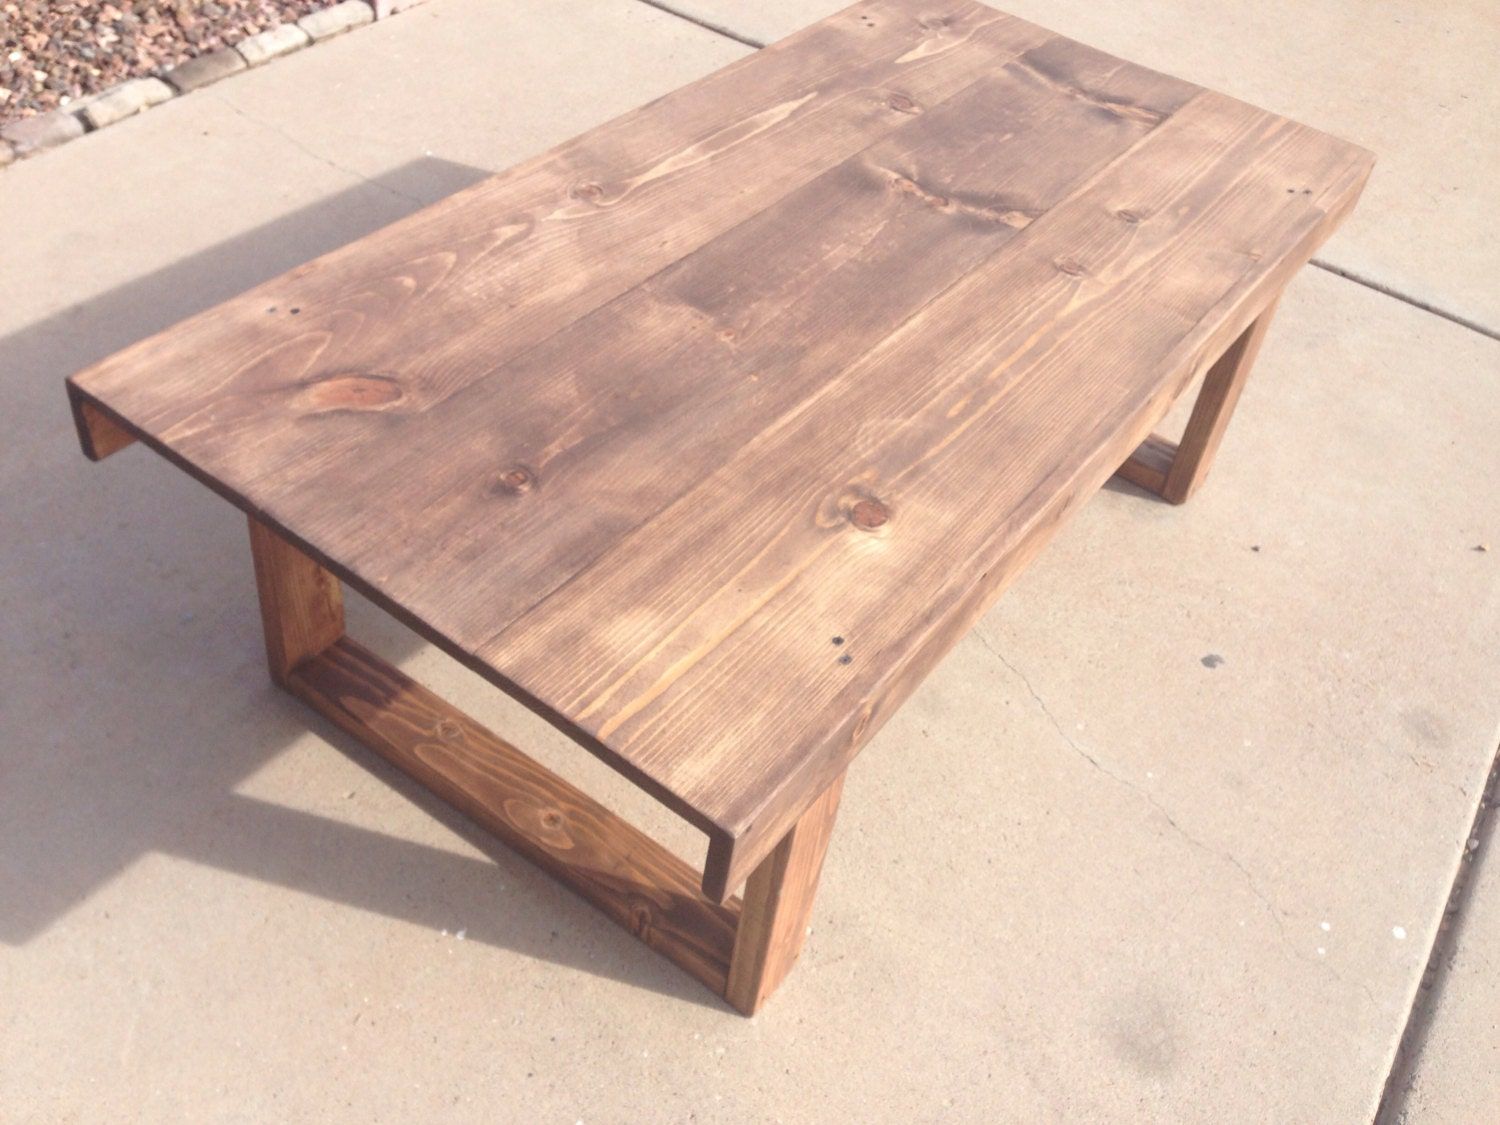 Handmade Larger Rustic Coffee Table In Walnut In Rustic Walnut Wood Coffee Tables (Photo 10 of 15)